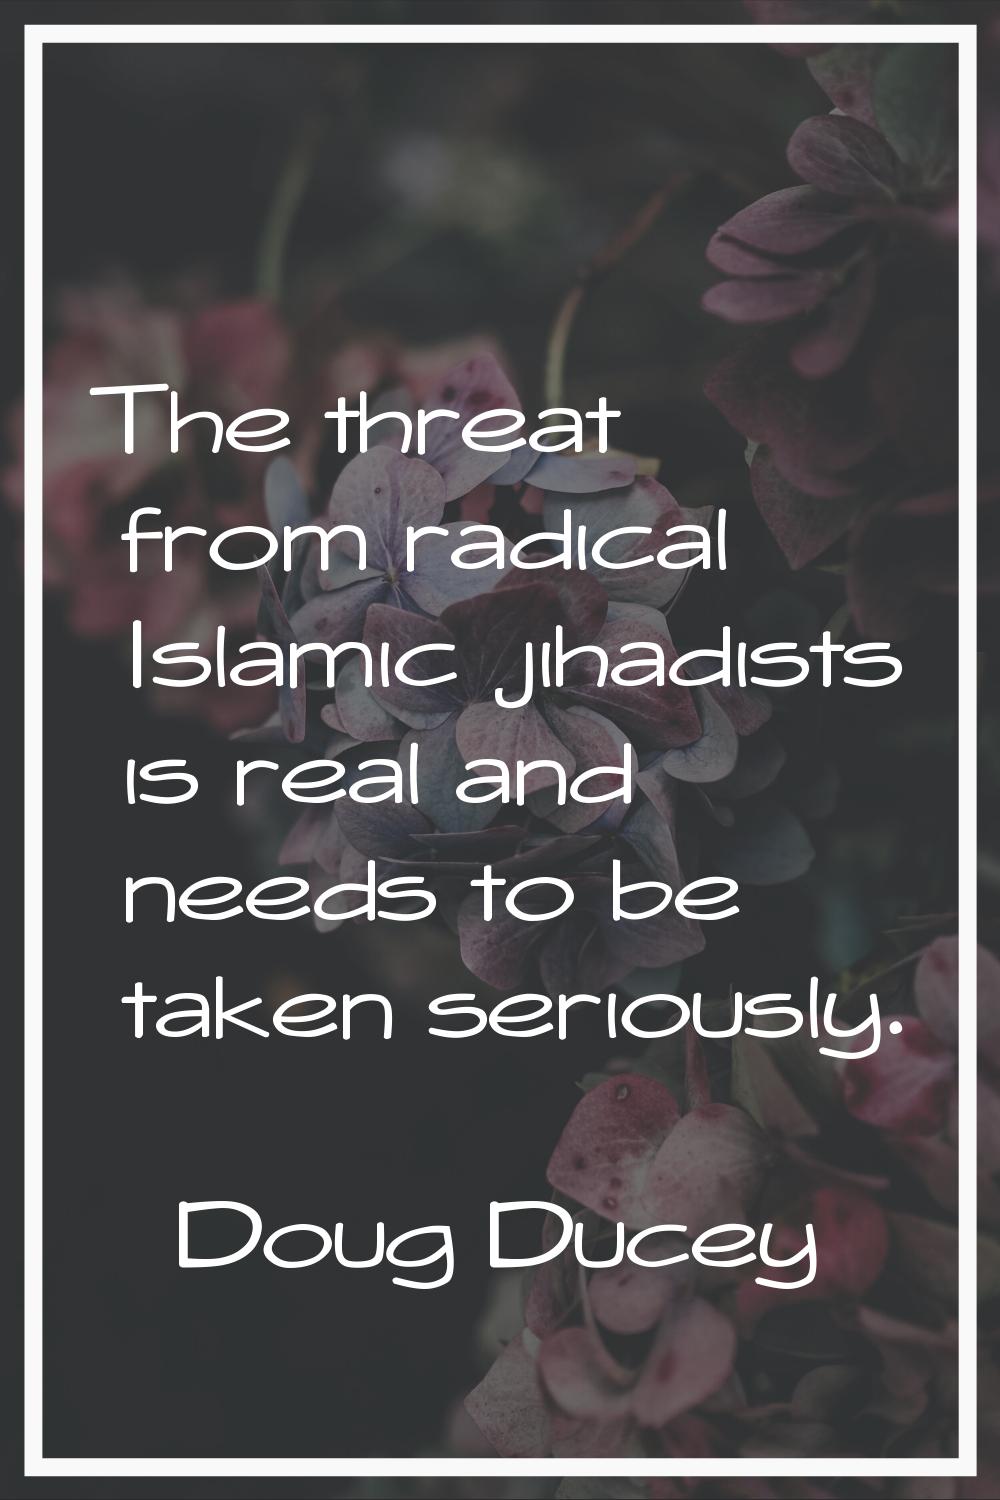 The threat from radical Islamic jihadists is real and needs to be taken seriously.